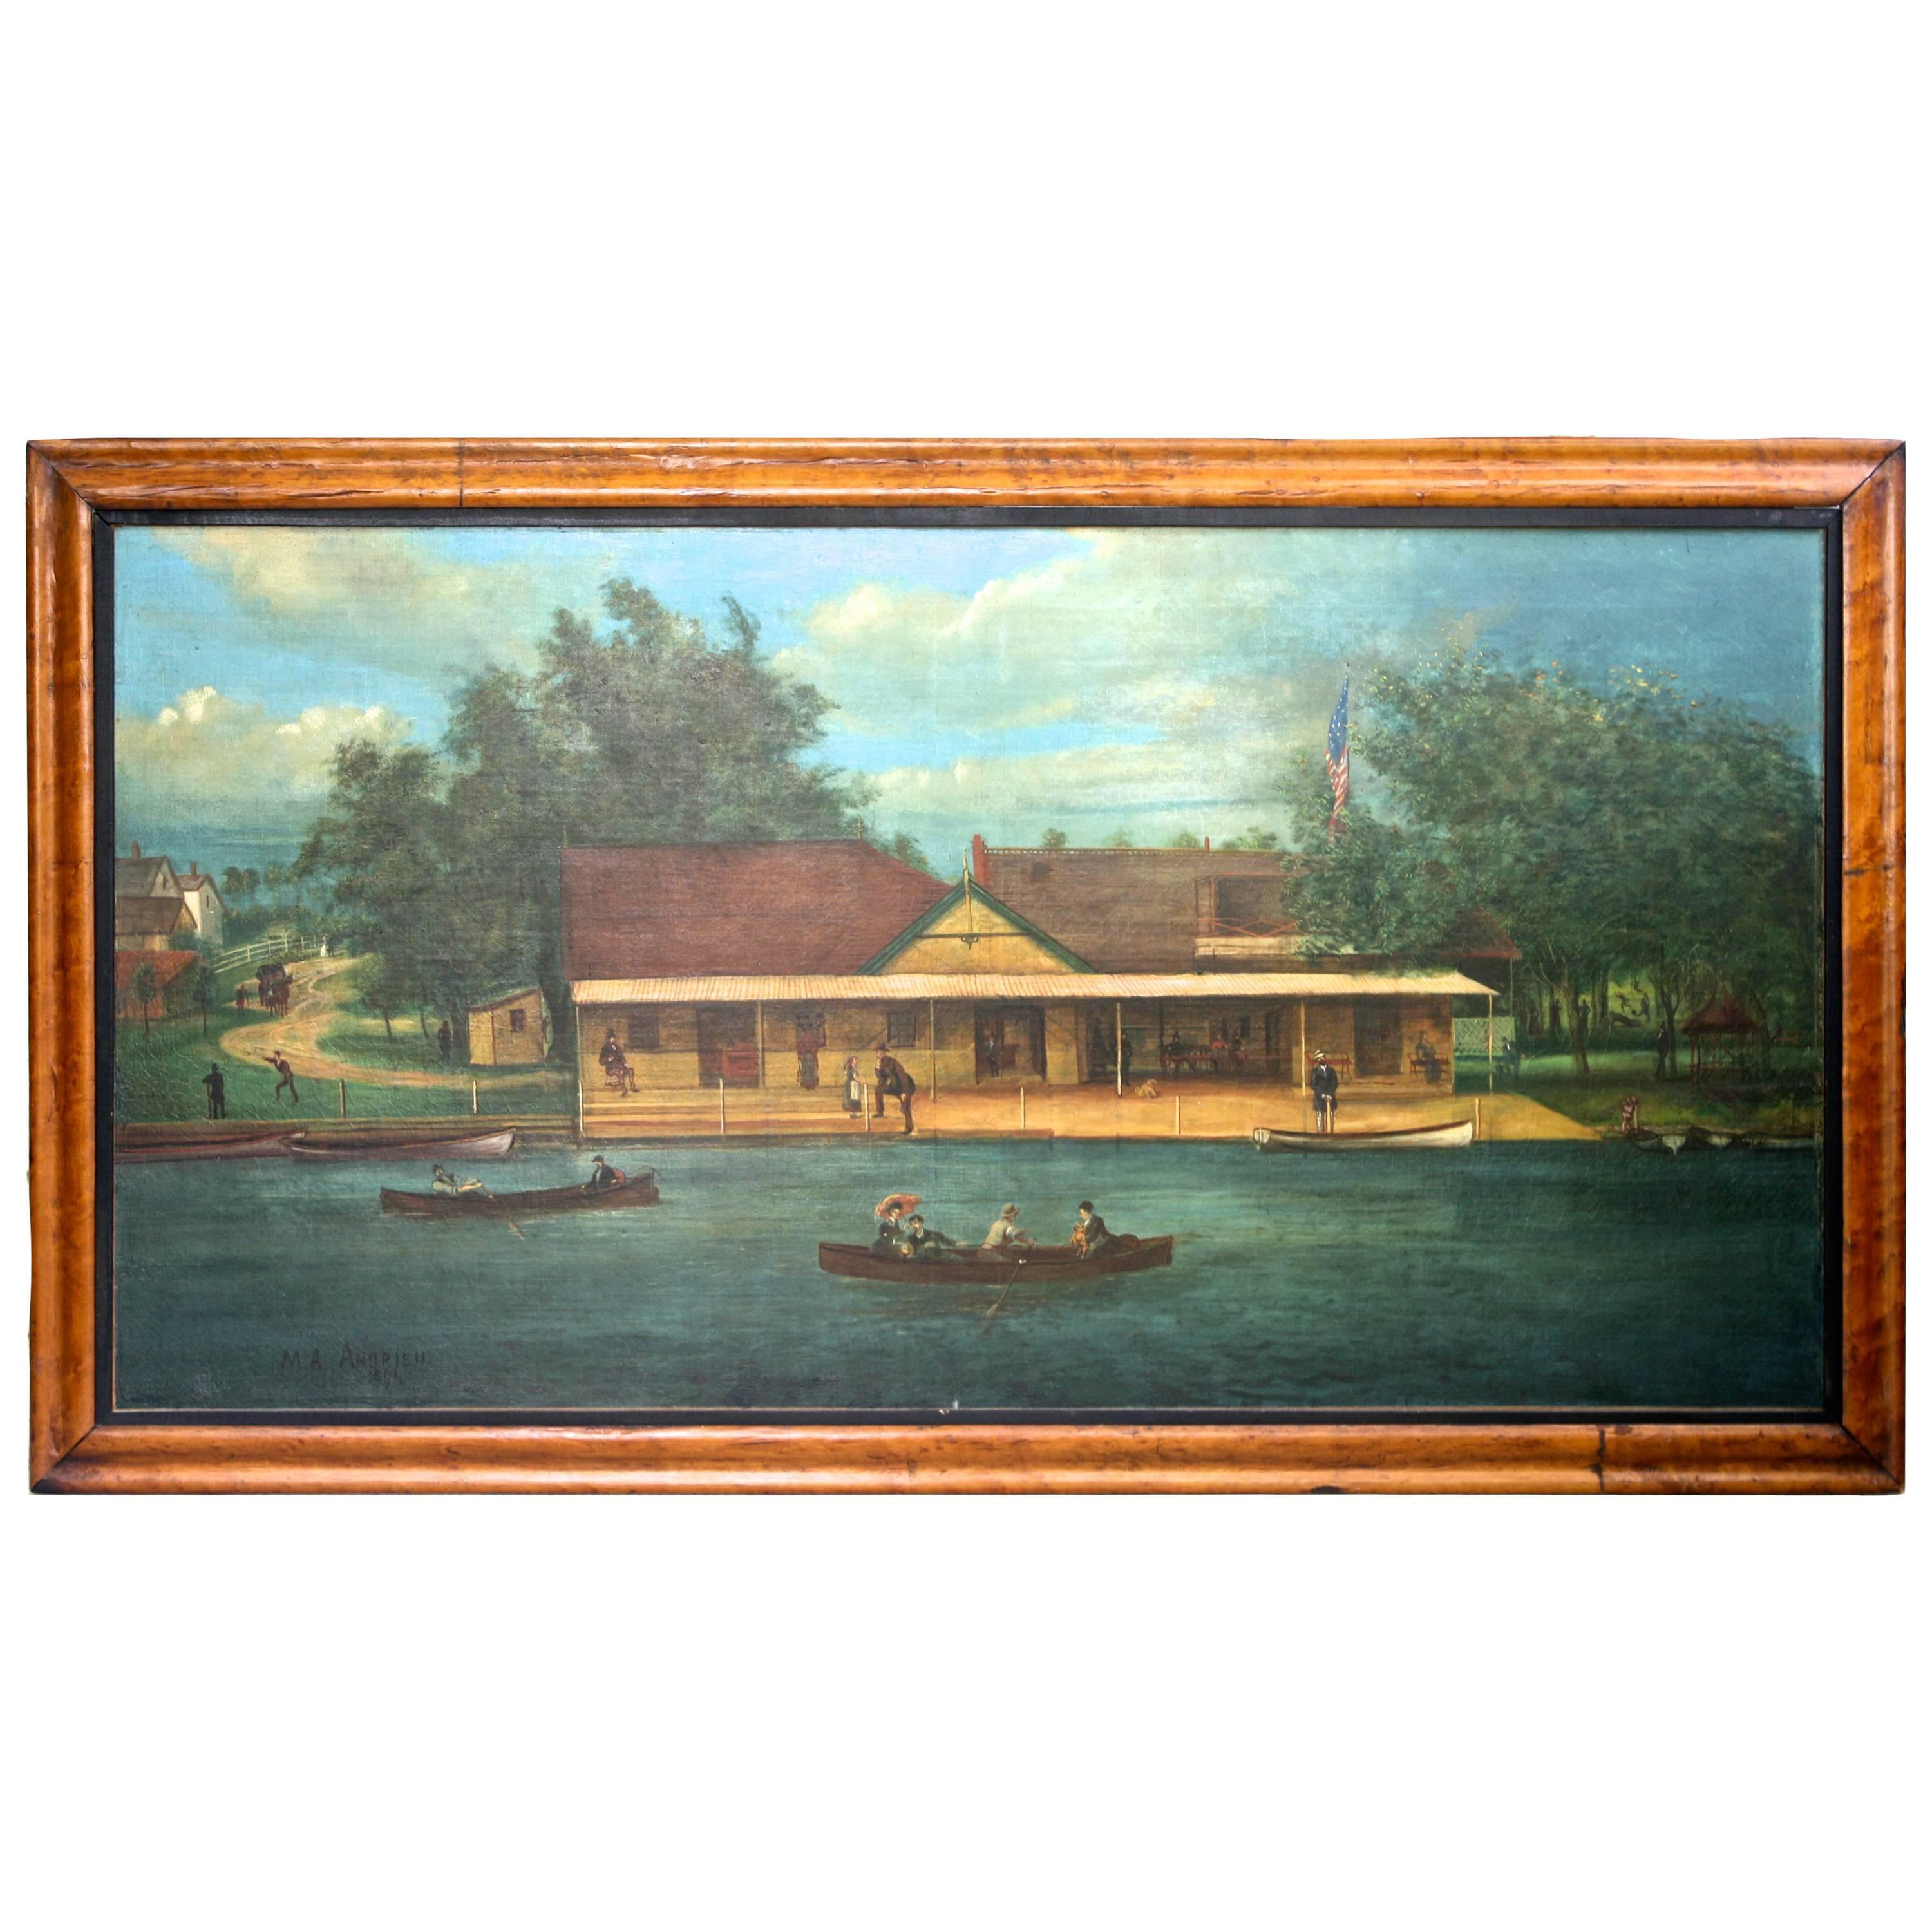 "Rhodes on the Pawtuxet" Painting by M. A. Andrieu For Sale